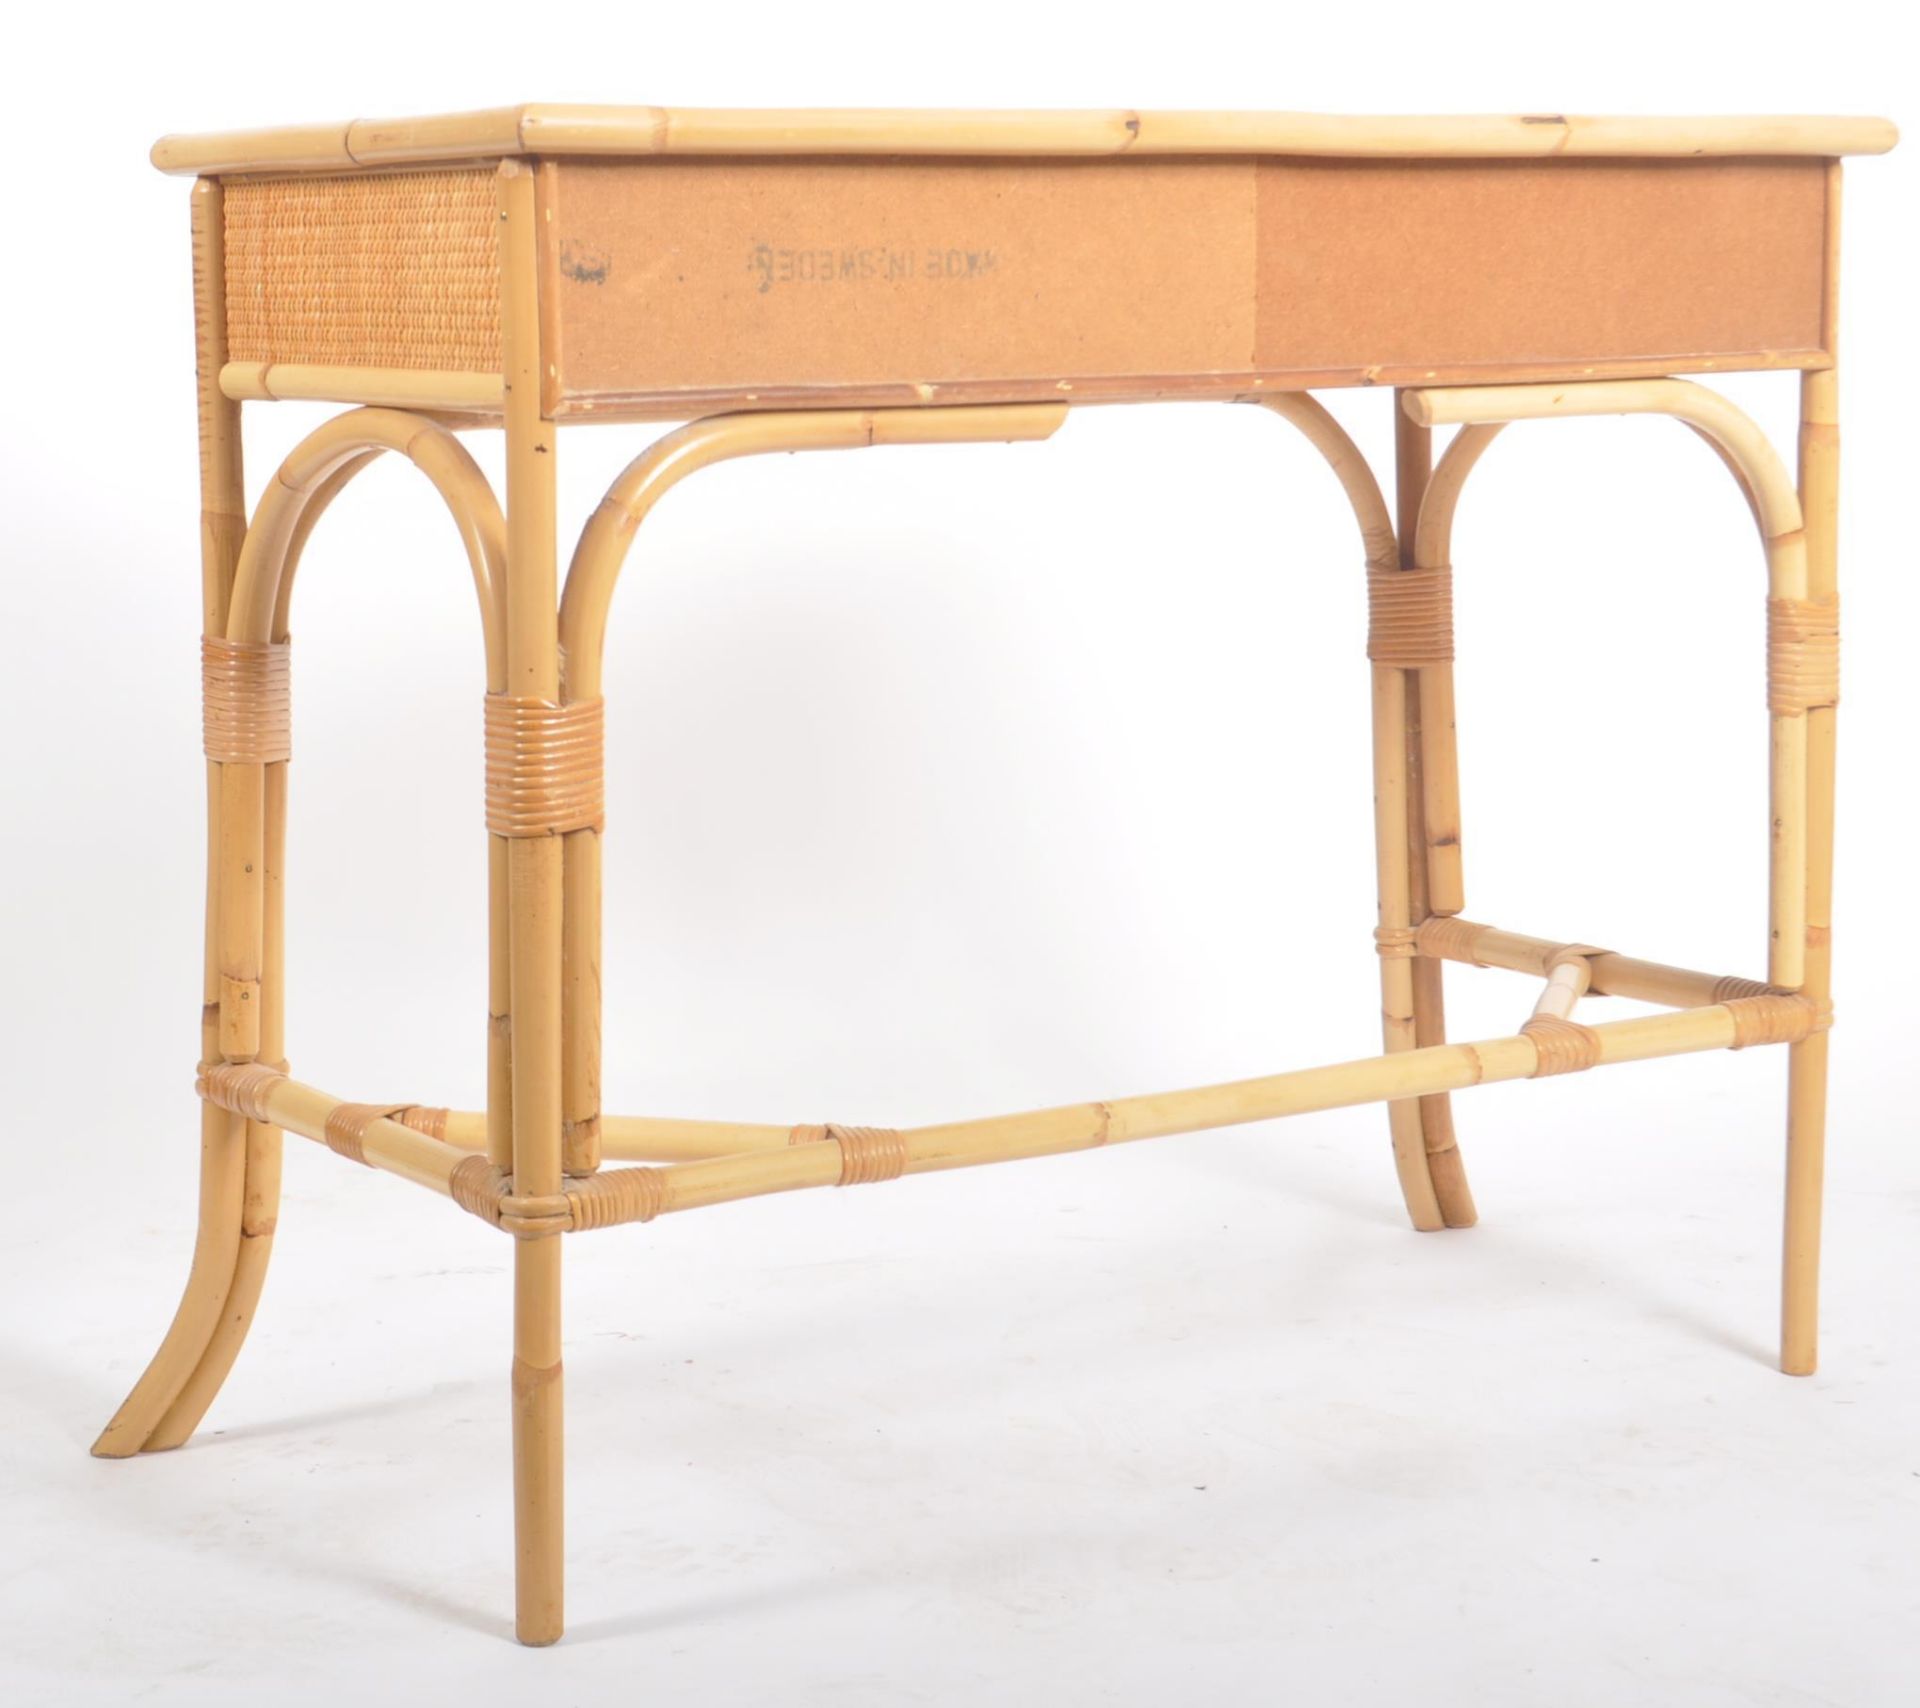 RETRO 20TH CENTURY BAMBOO AND RATTAN DRESSING TABLE - Image 7 of 8